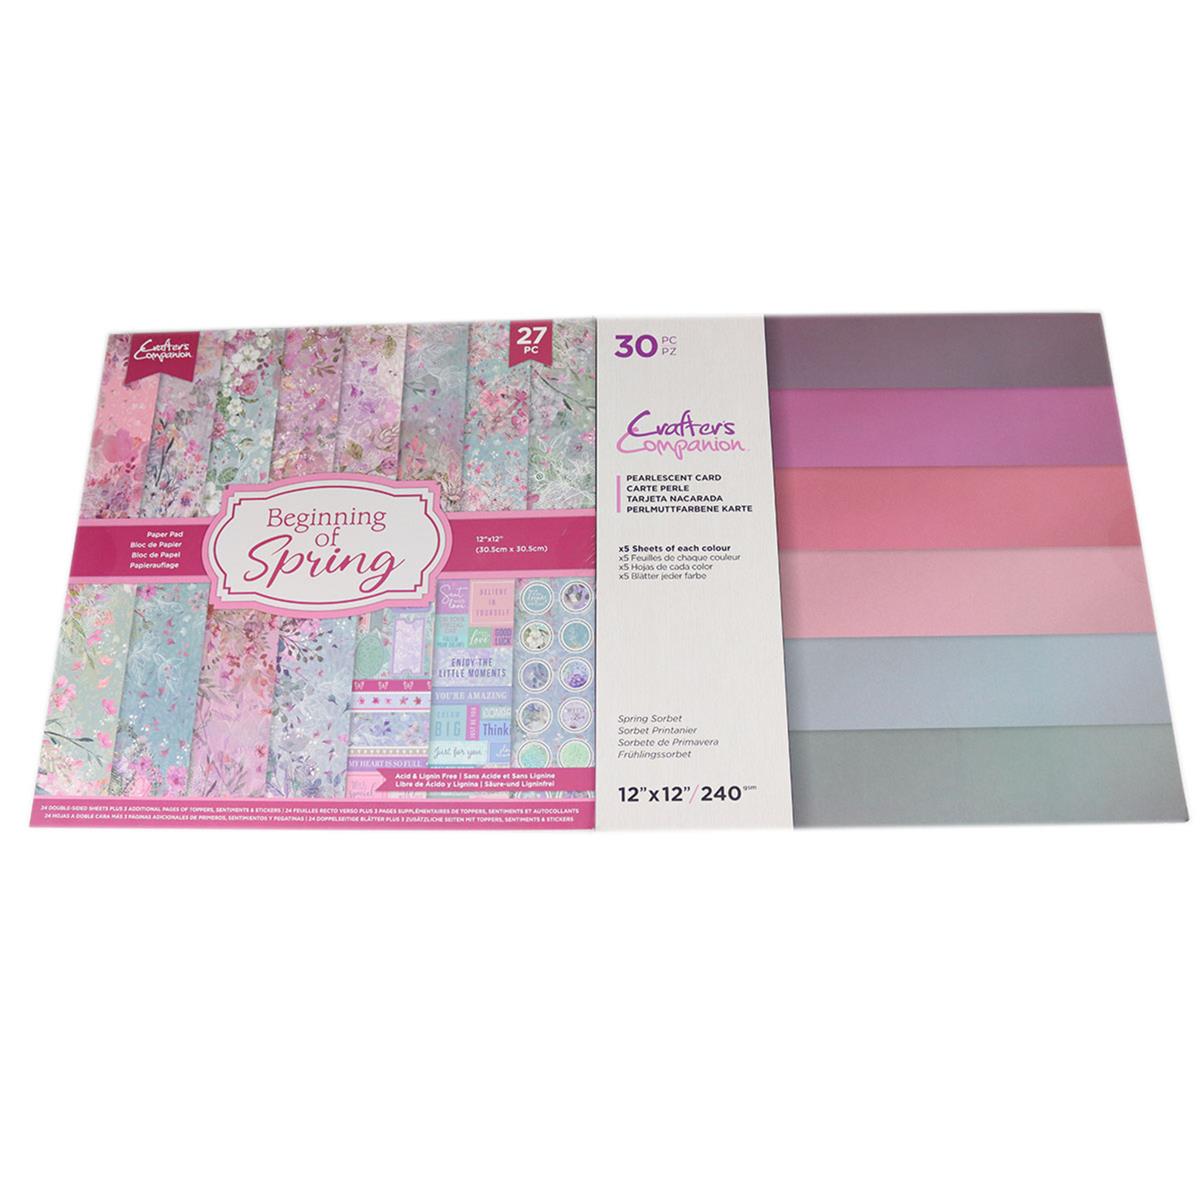 Creative Expressions Pastel Paper Pack 220-240gsm A4 Pk20 4 Sheets of